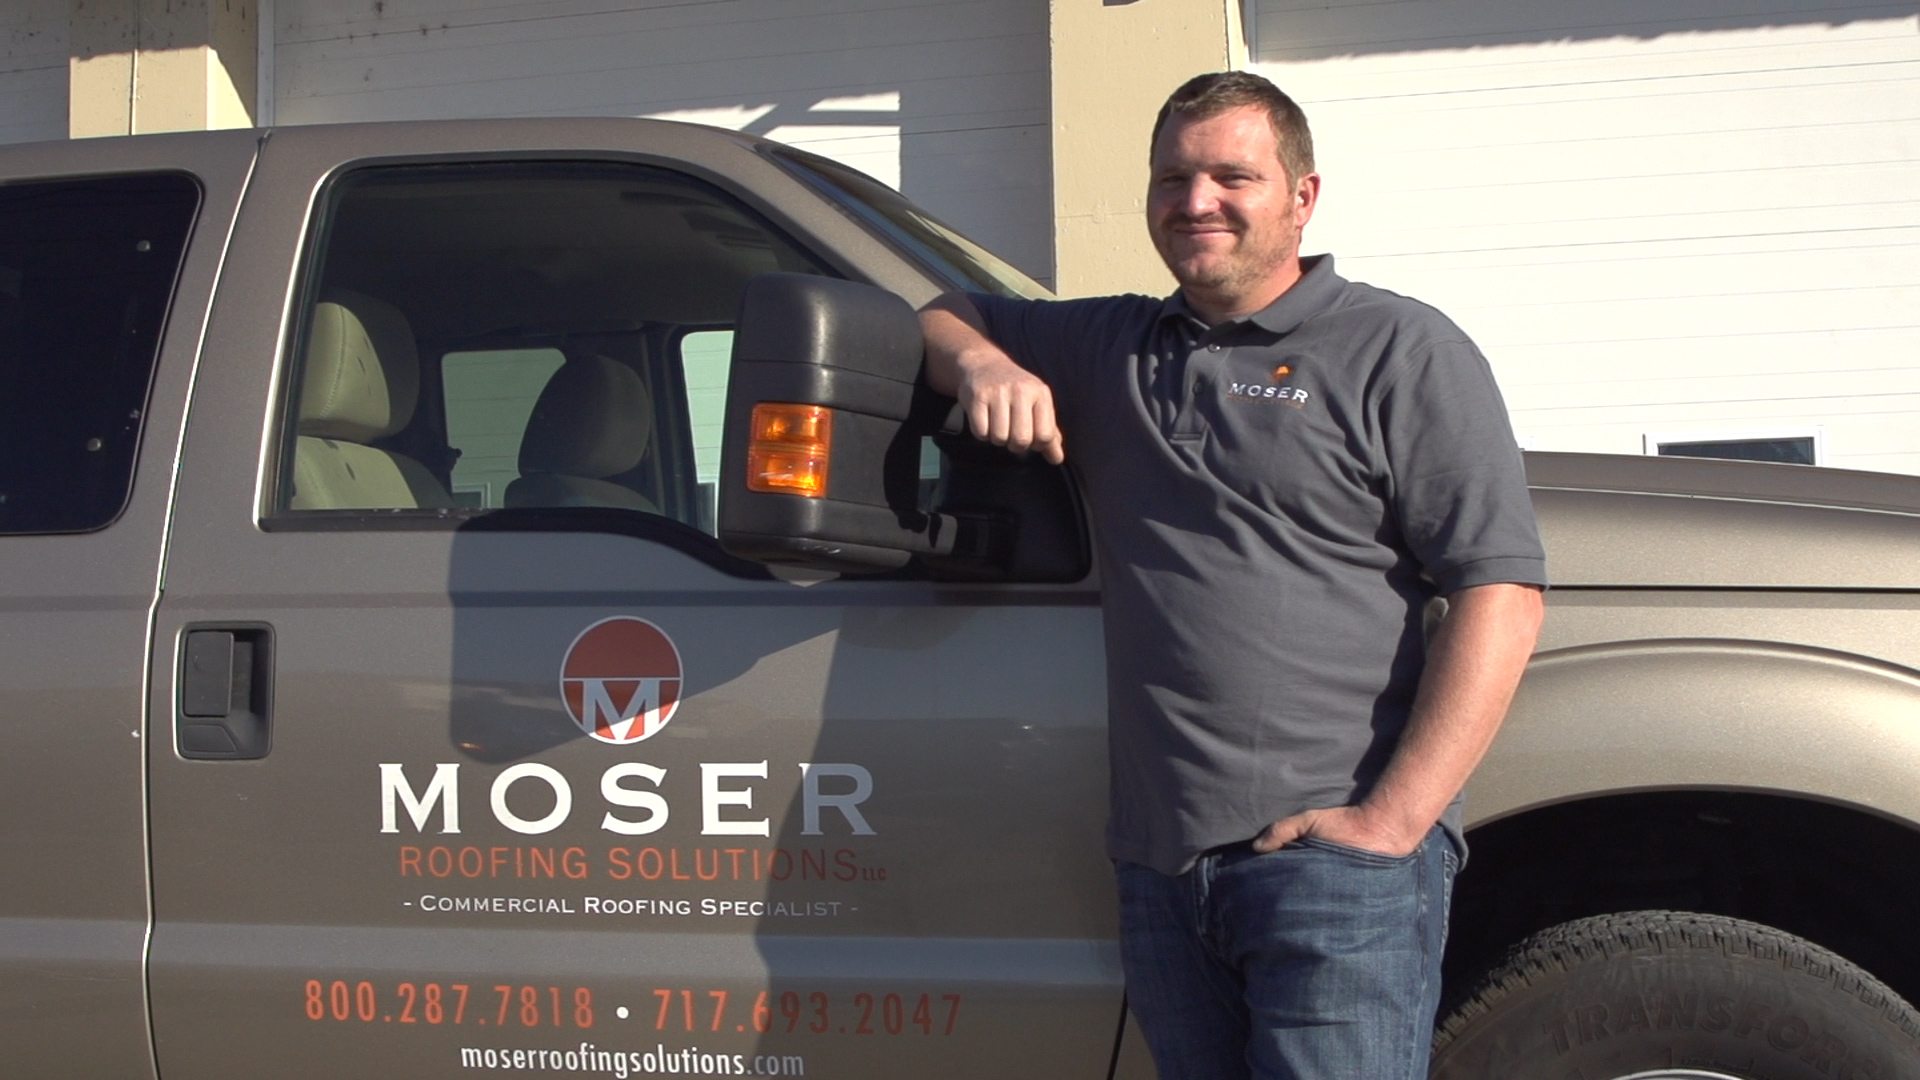 Moser Roofing team.